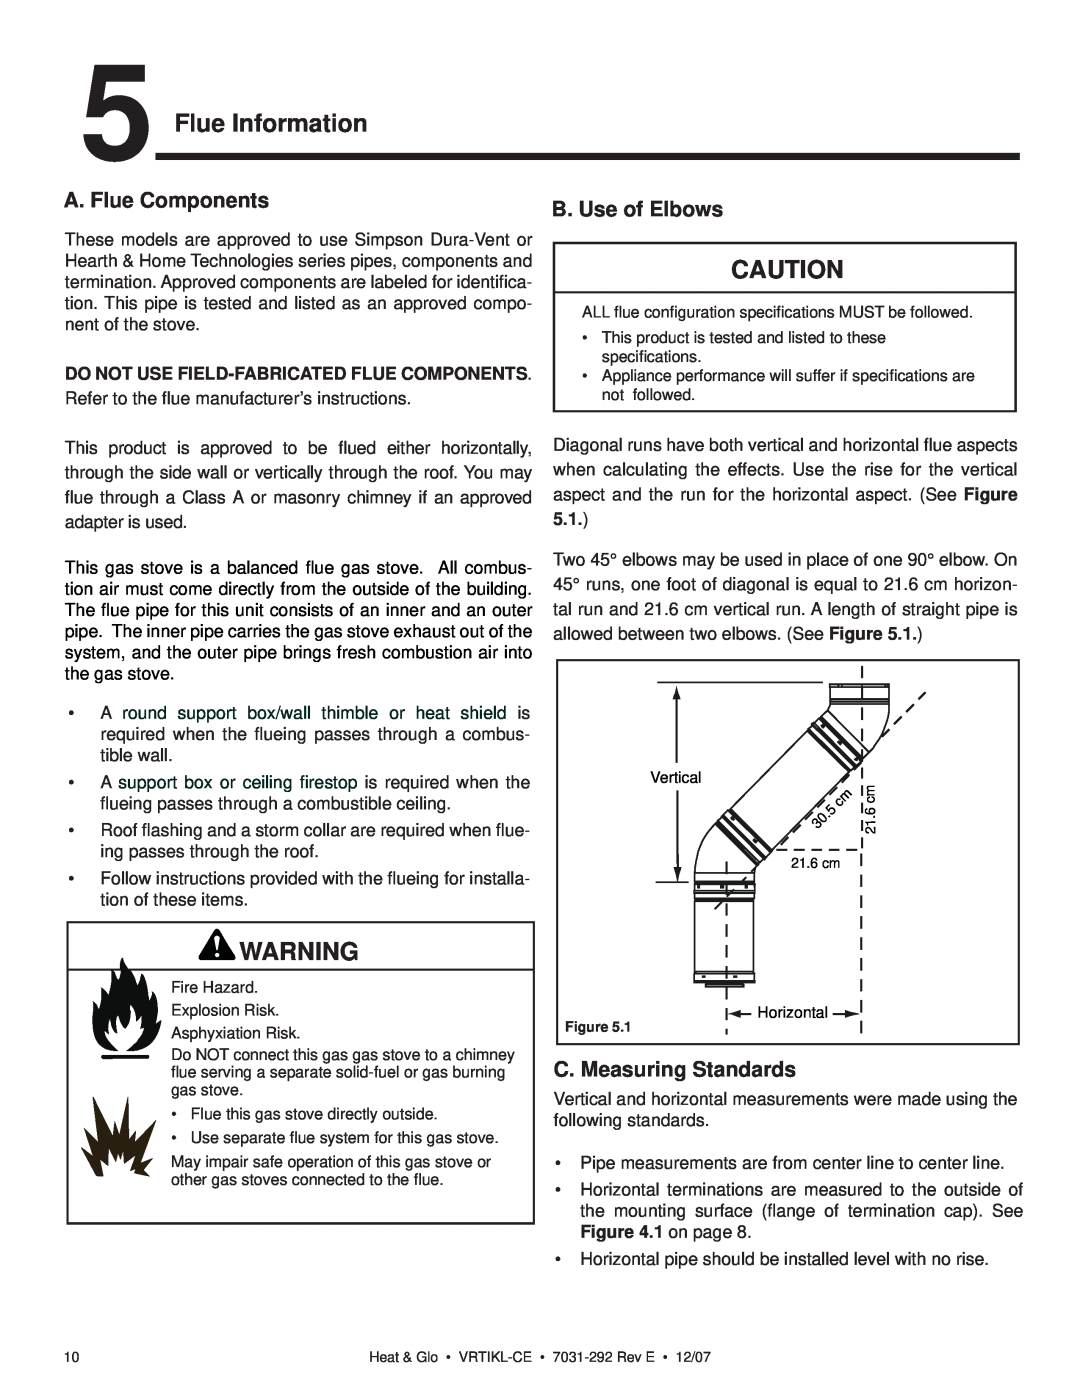 Hearth and Home Technologies VRTIKL-CE Flue Information, A. Flue Components, B. Use of Elbows, C. Measuring Standards 